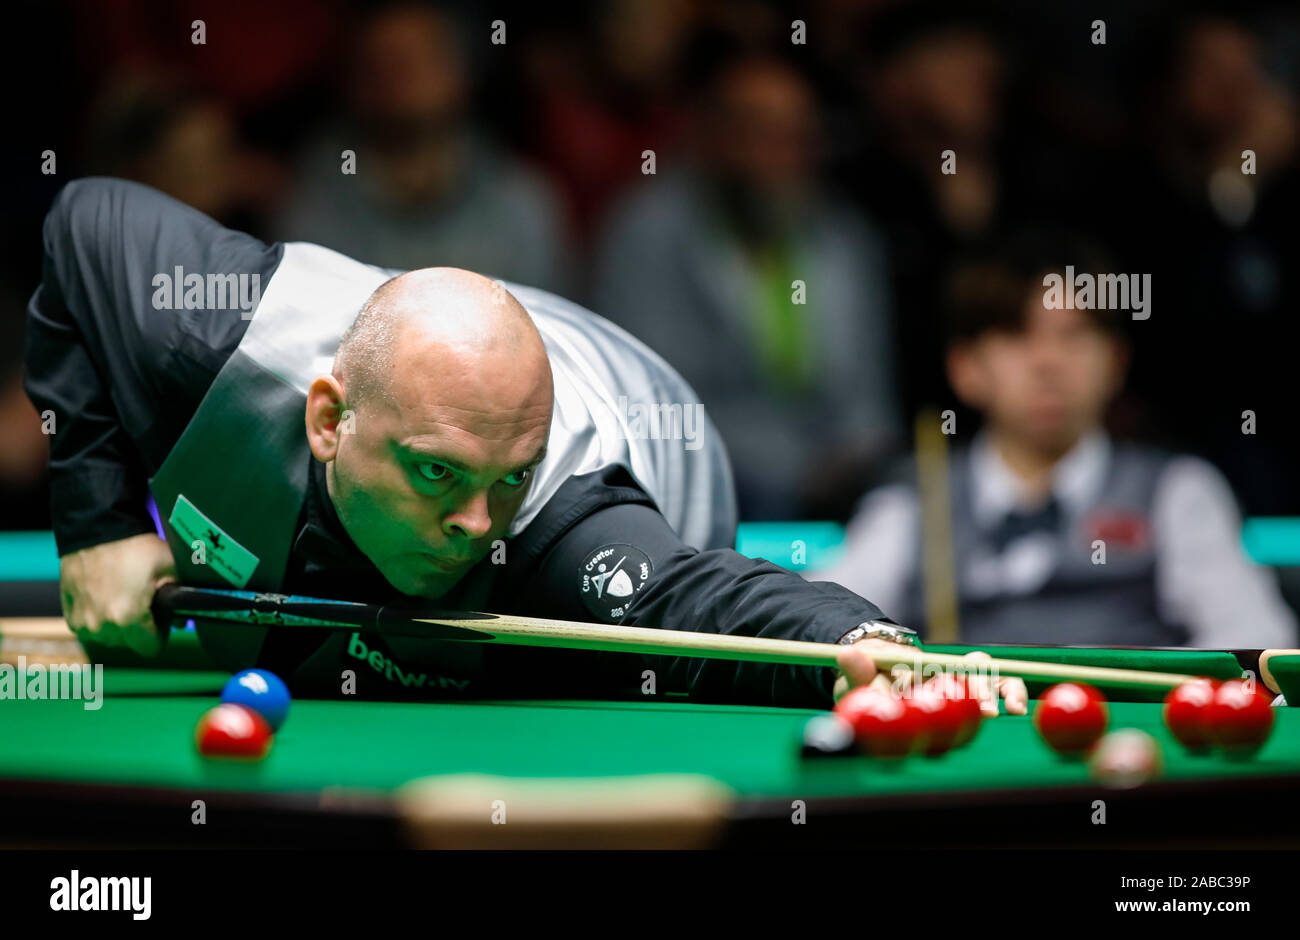 York. 26th Nov, 2019. Lei Peifan of China competes during the Snooker UK Championship 2019 first round match with Stuart Bingham of England in York, Britain on Nov